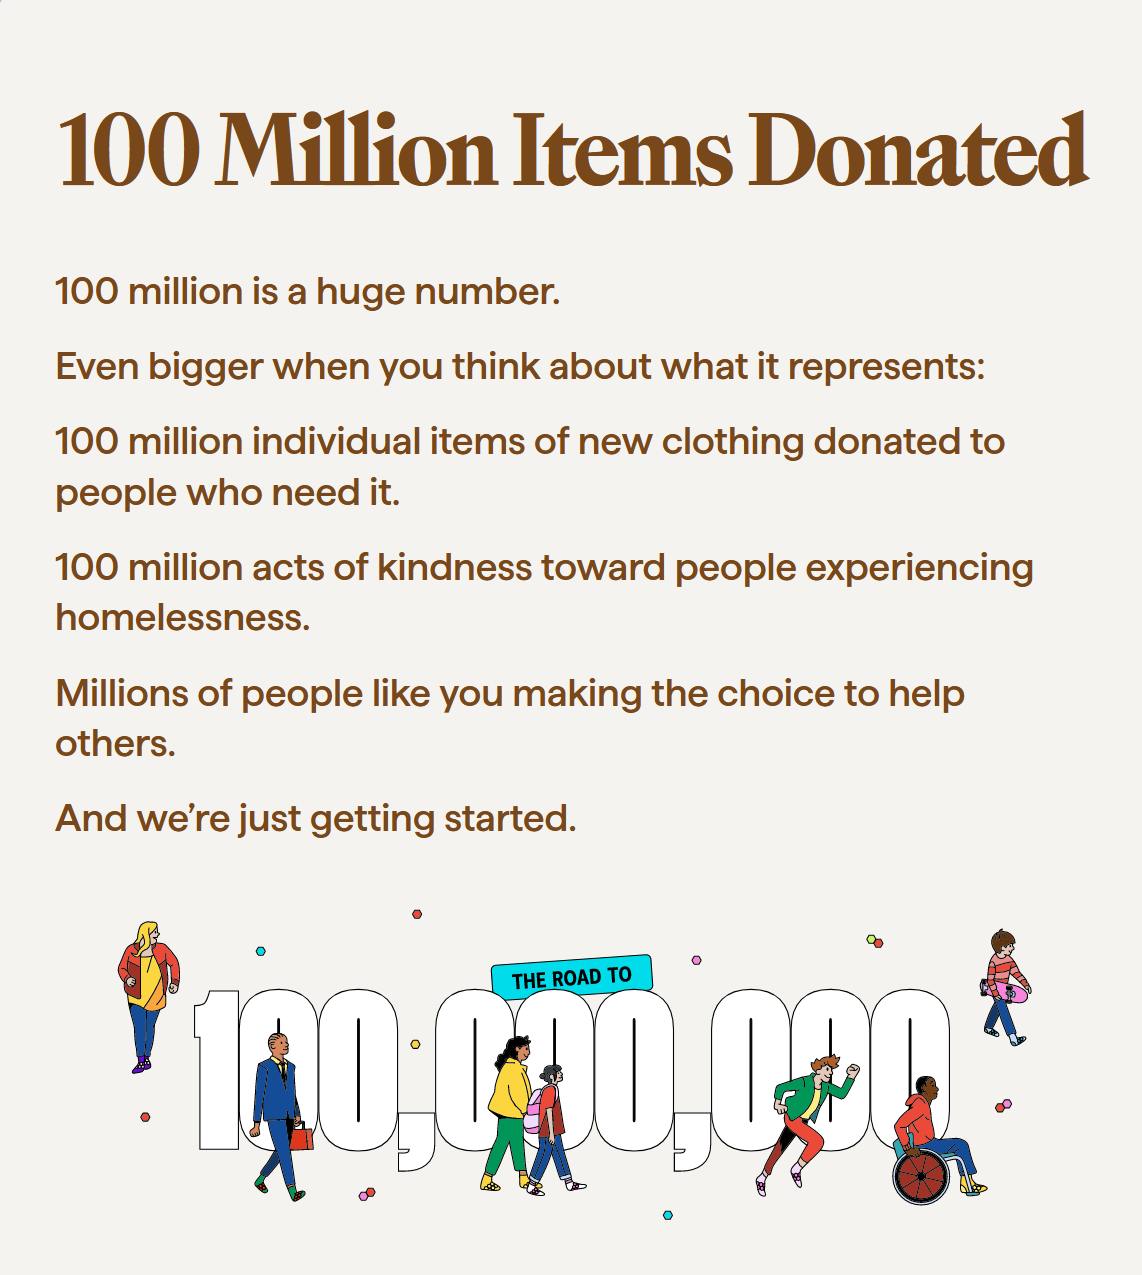 "100 Million Items Donated" message by Bombas